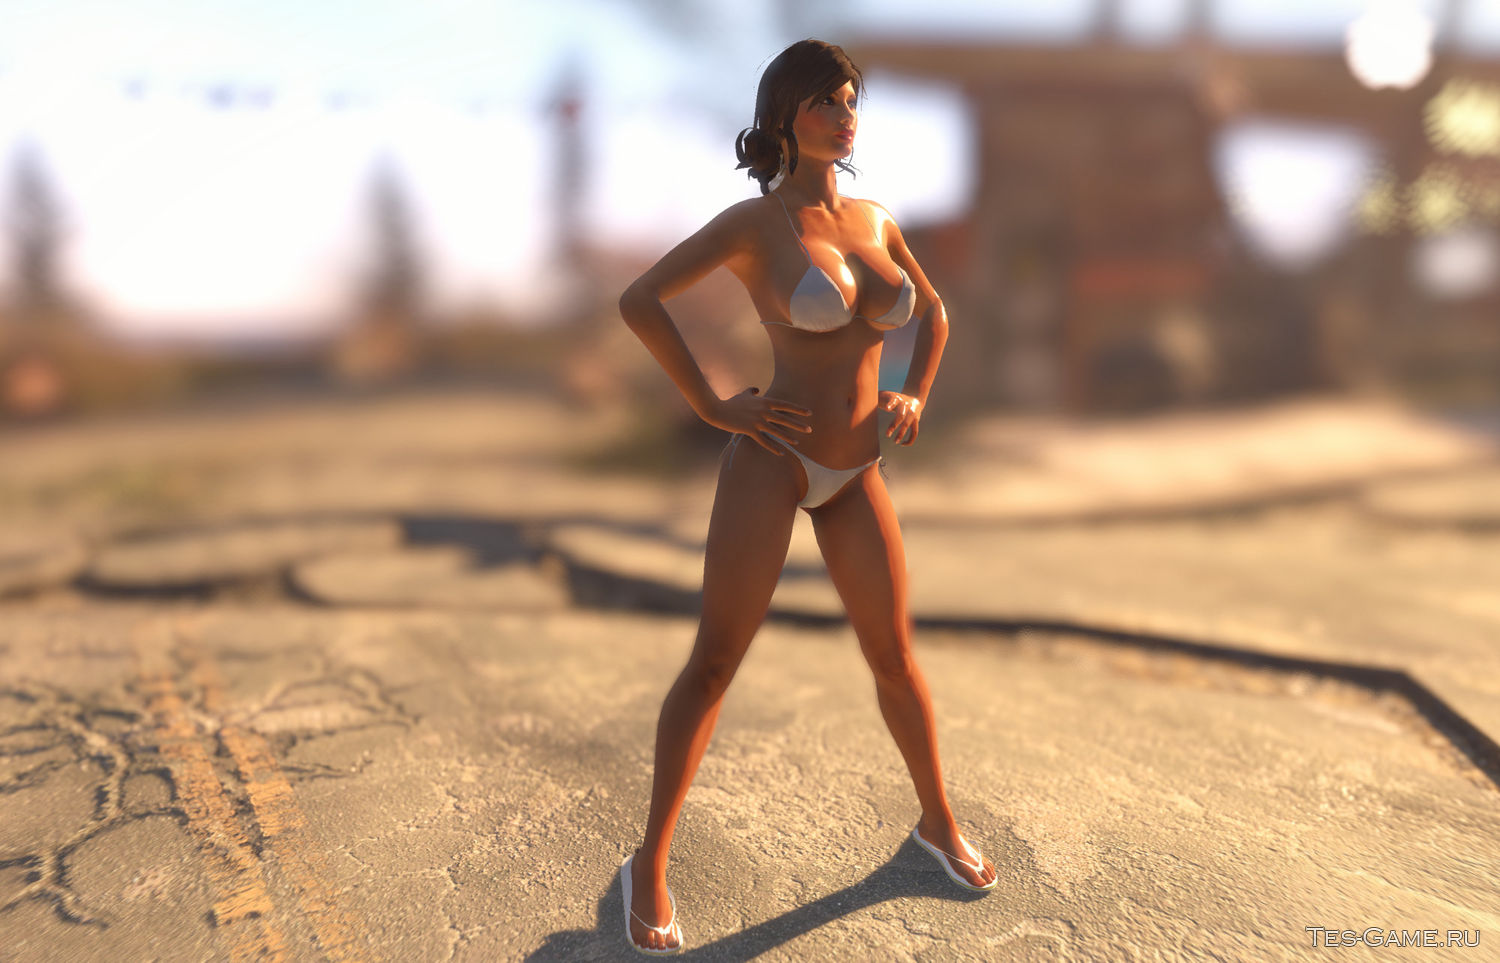 Insignificant object remover для fallout 4 фото 63